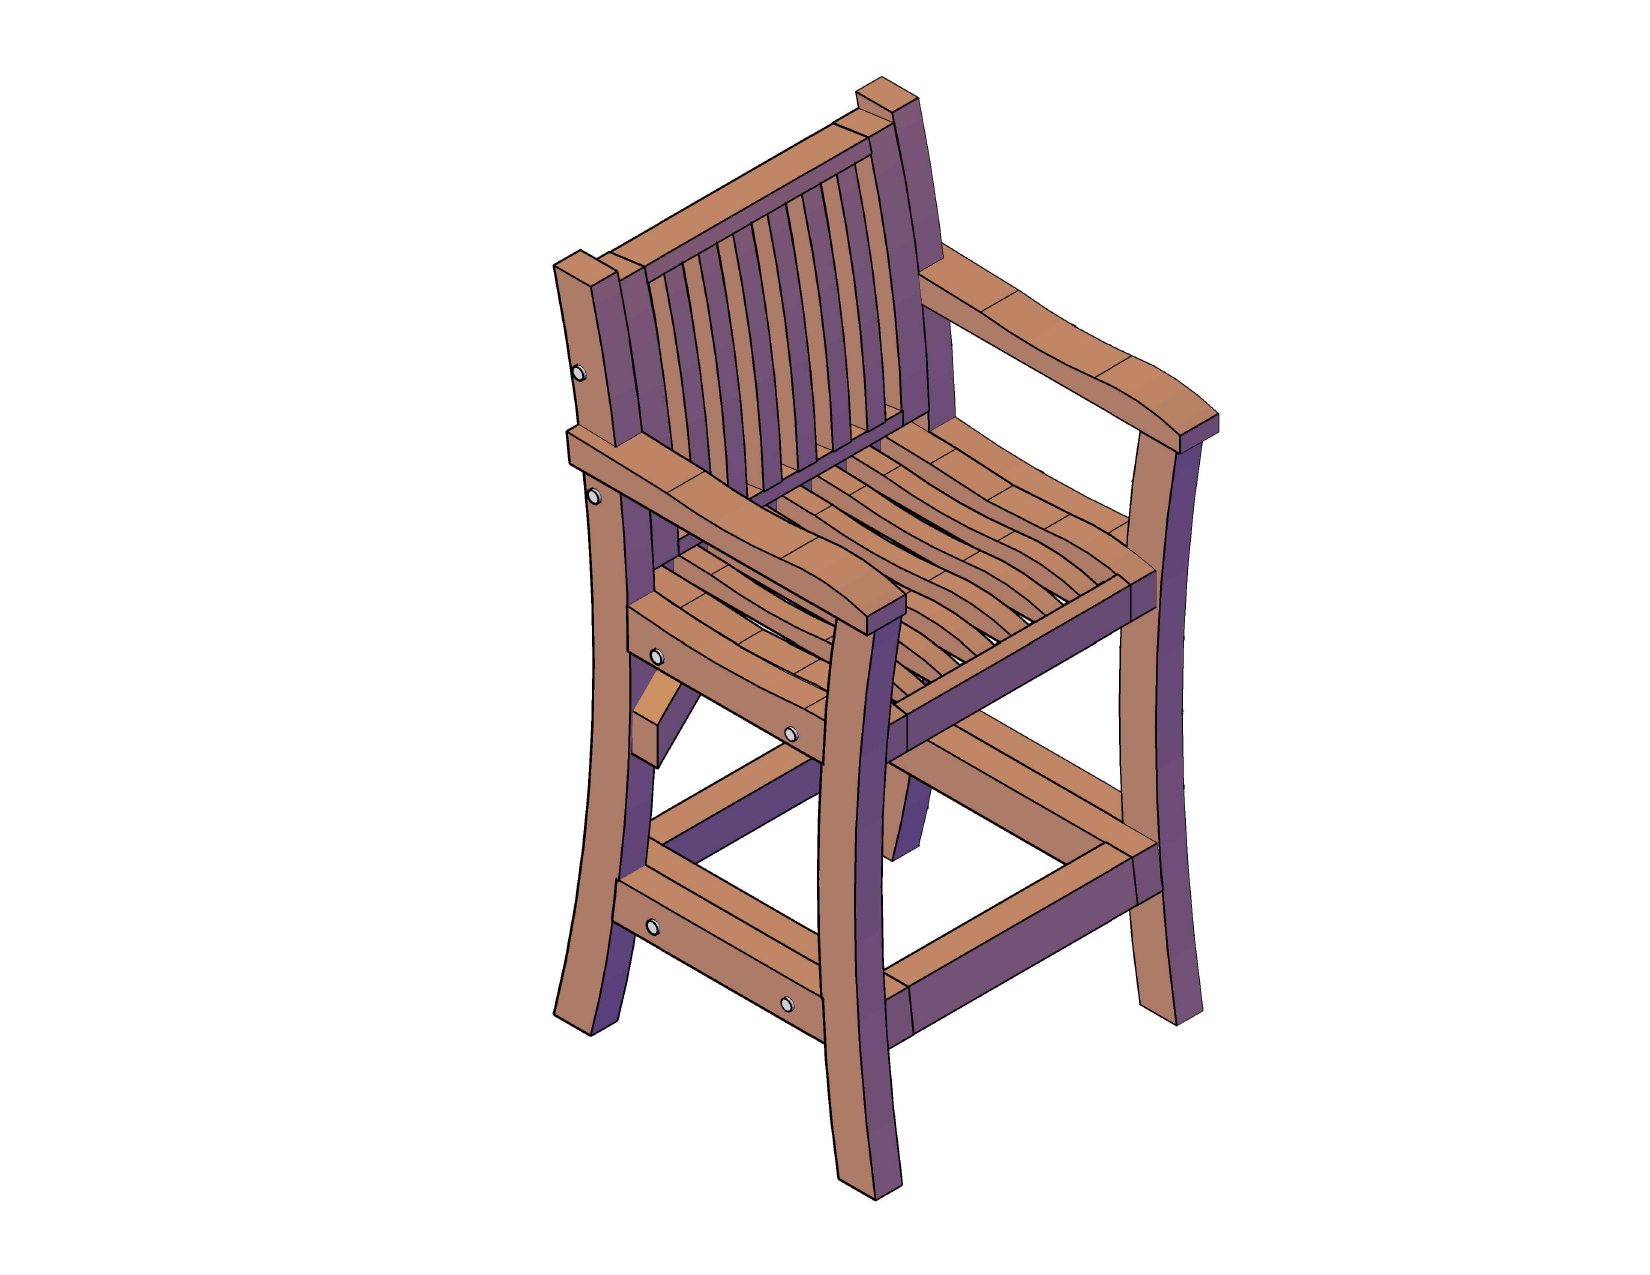 /media/cocktail_seating/cocktail_seating_redwood_cocktail_bar_stool_with_arms.jpg